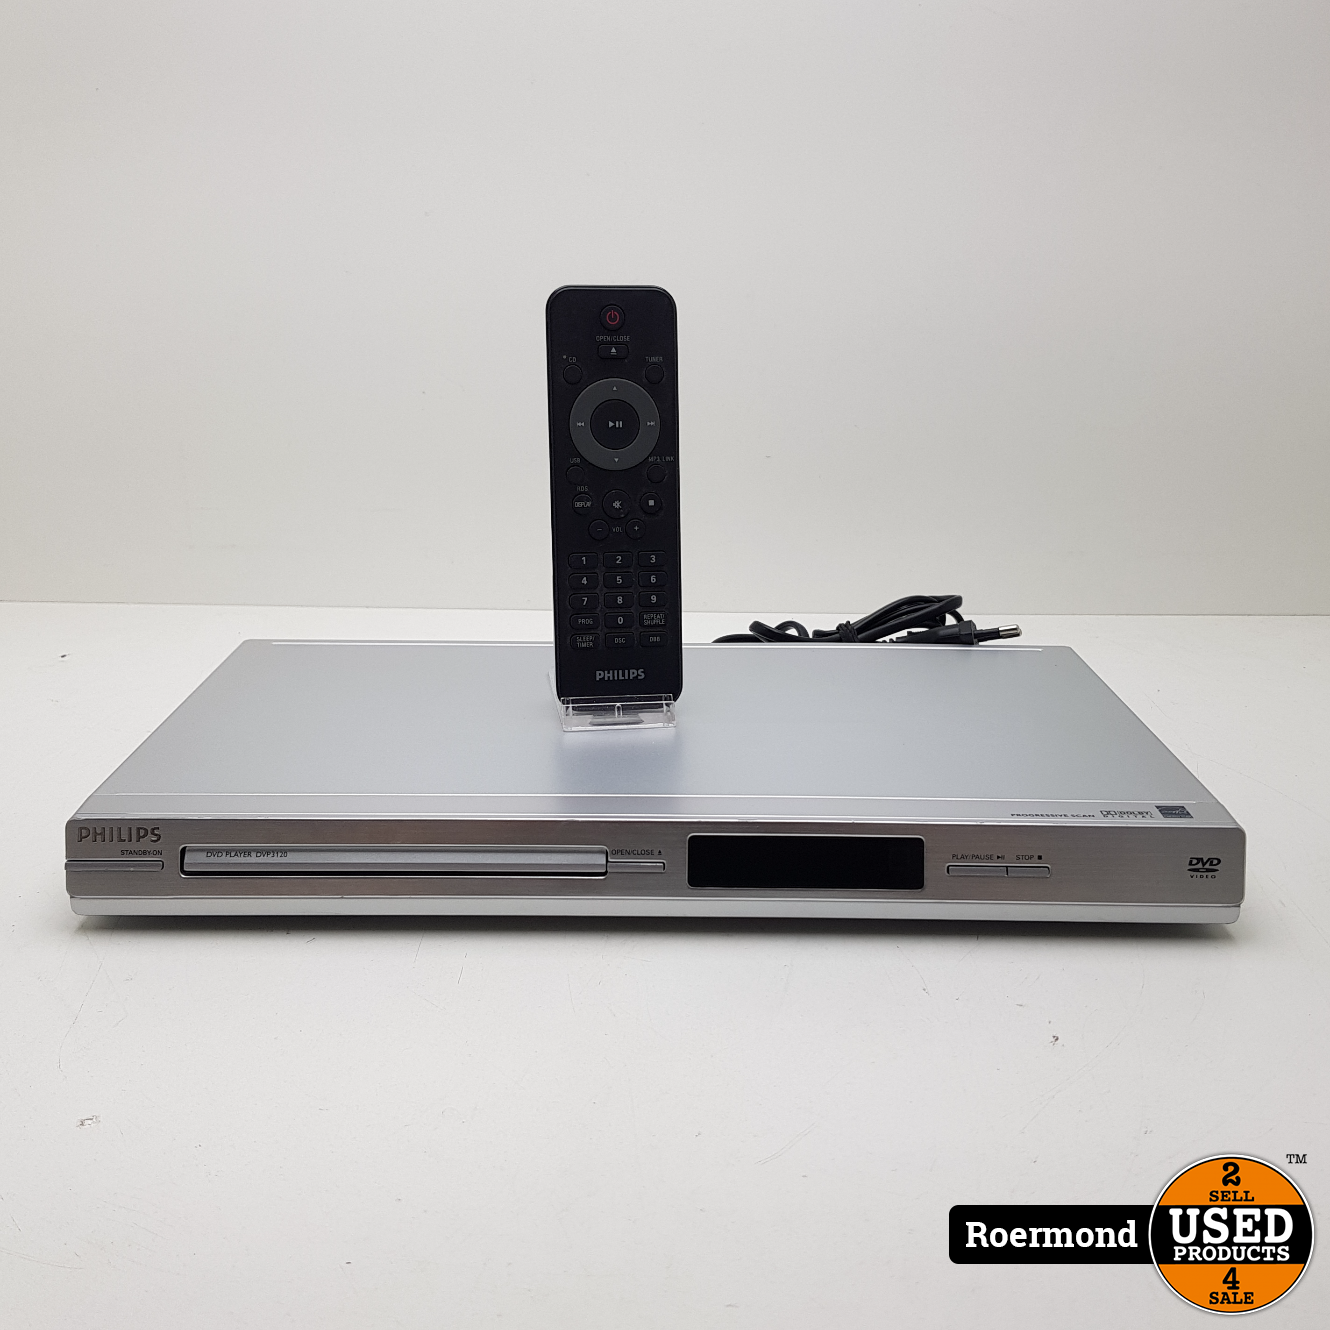 philips Philips DVP3260 DVD-Speler USED - Used Products Roermond